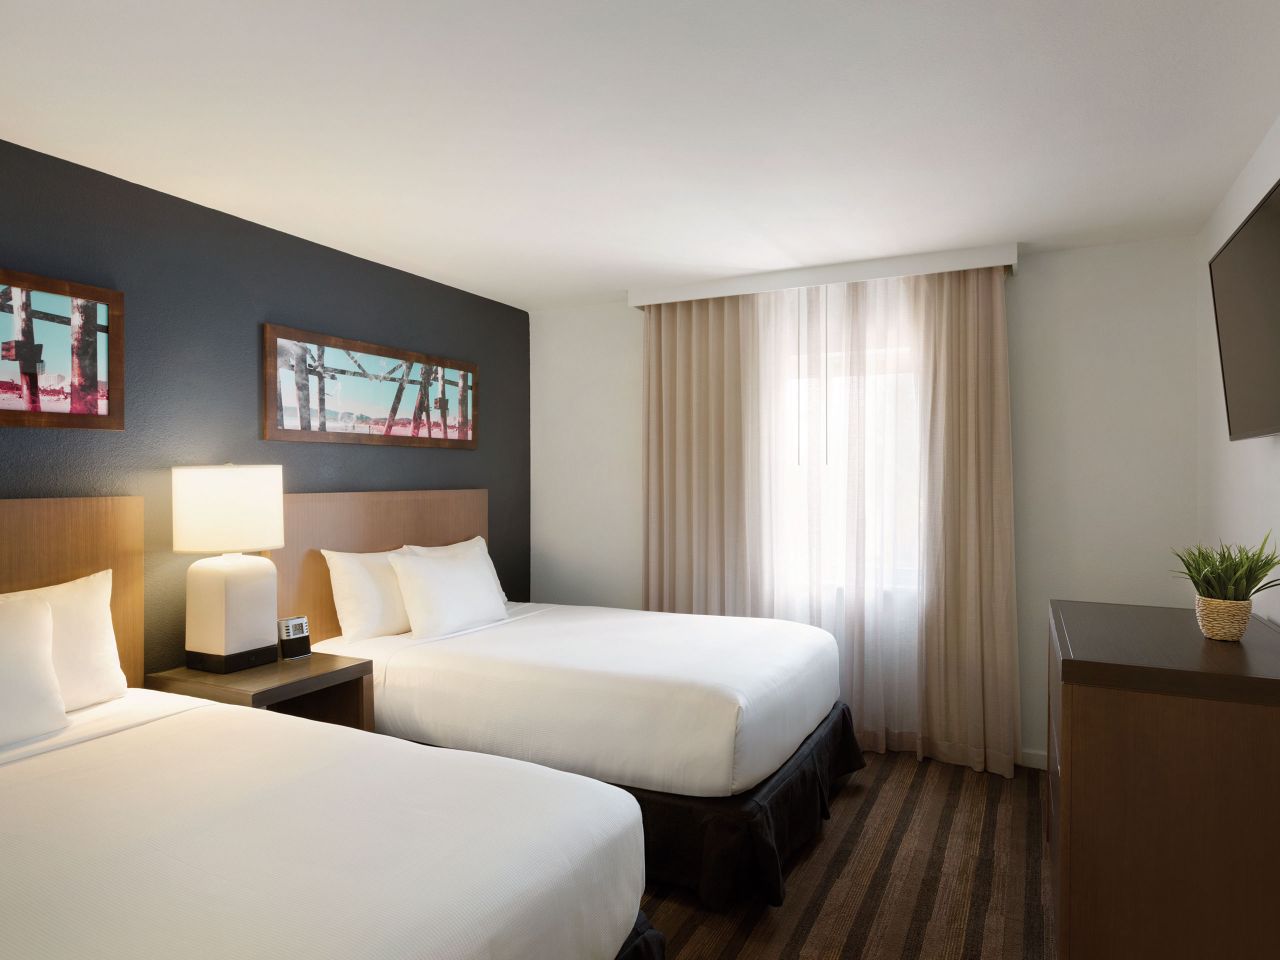 Extended-stay Hotel near Miami International Airport ...